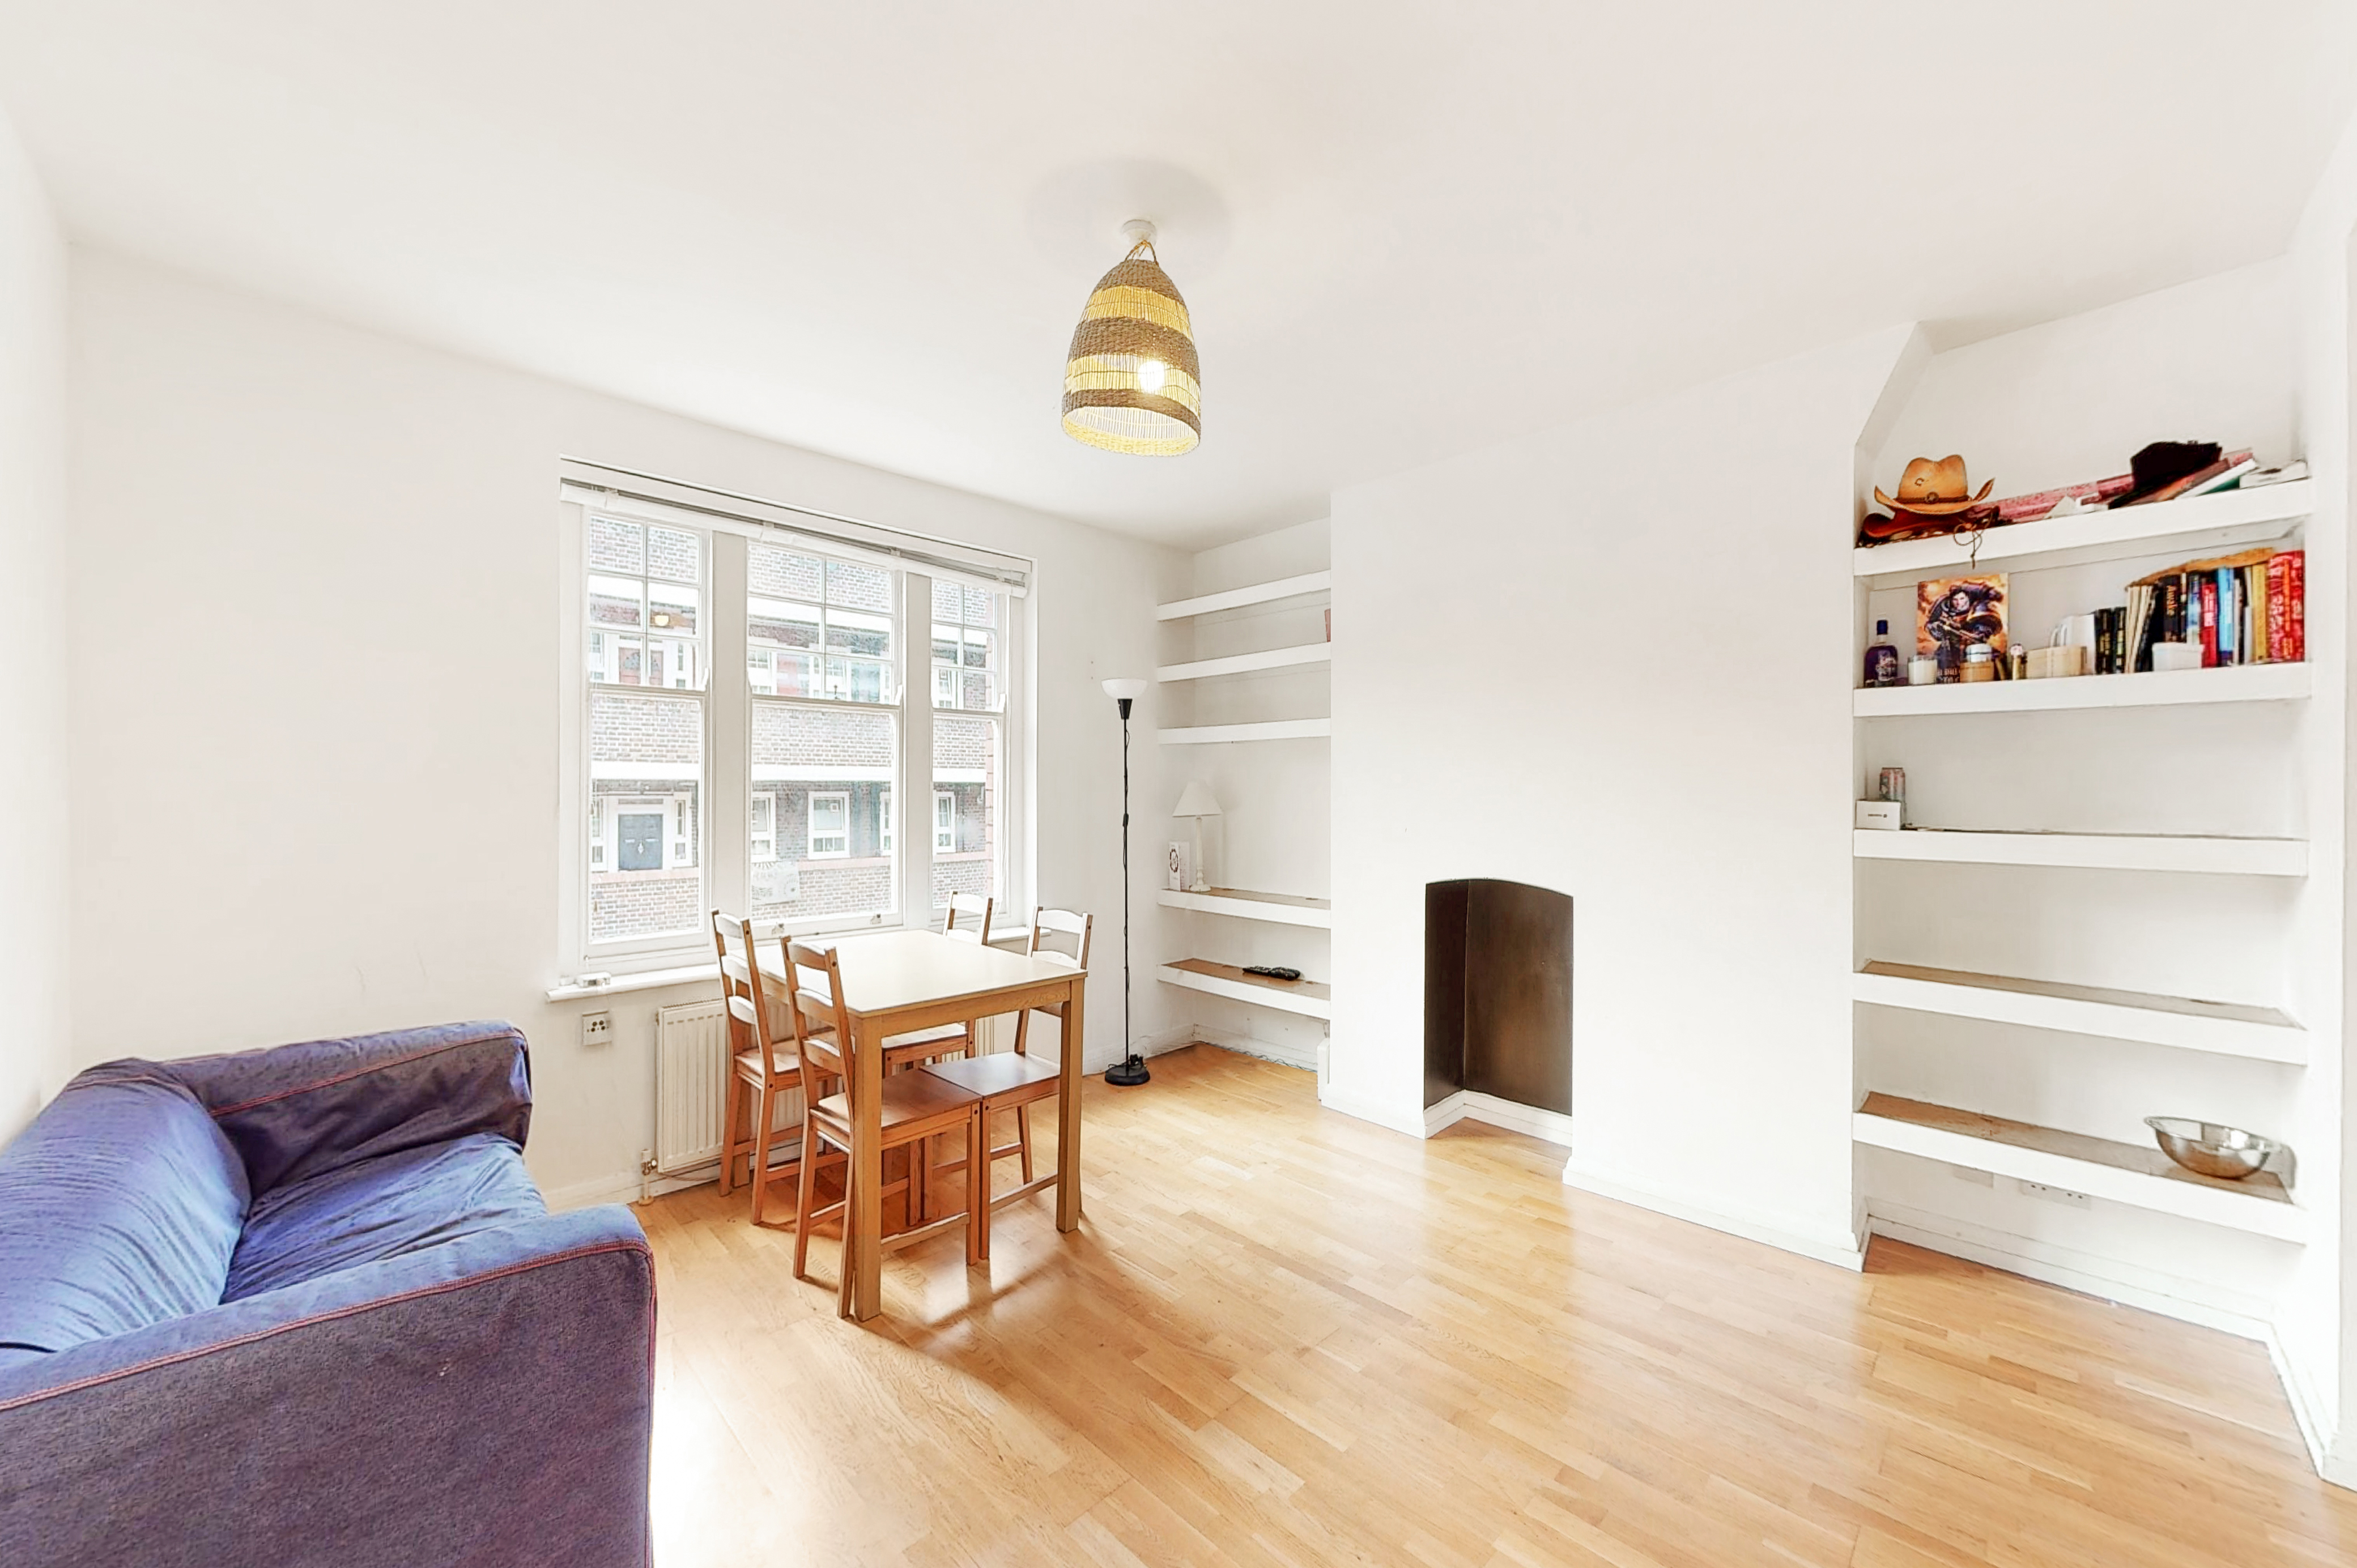 3 bed Apartment/Flat/Studio for rent in Stepney. From PropertyLoop